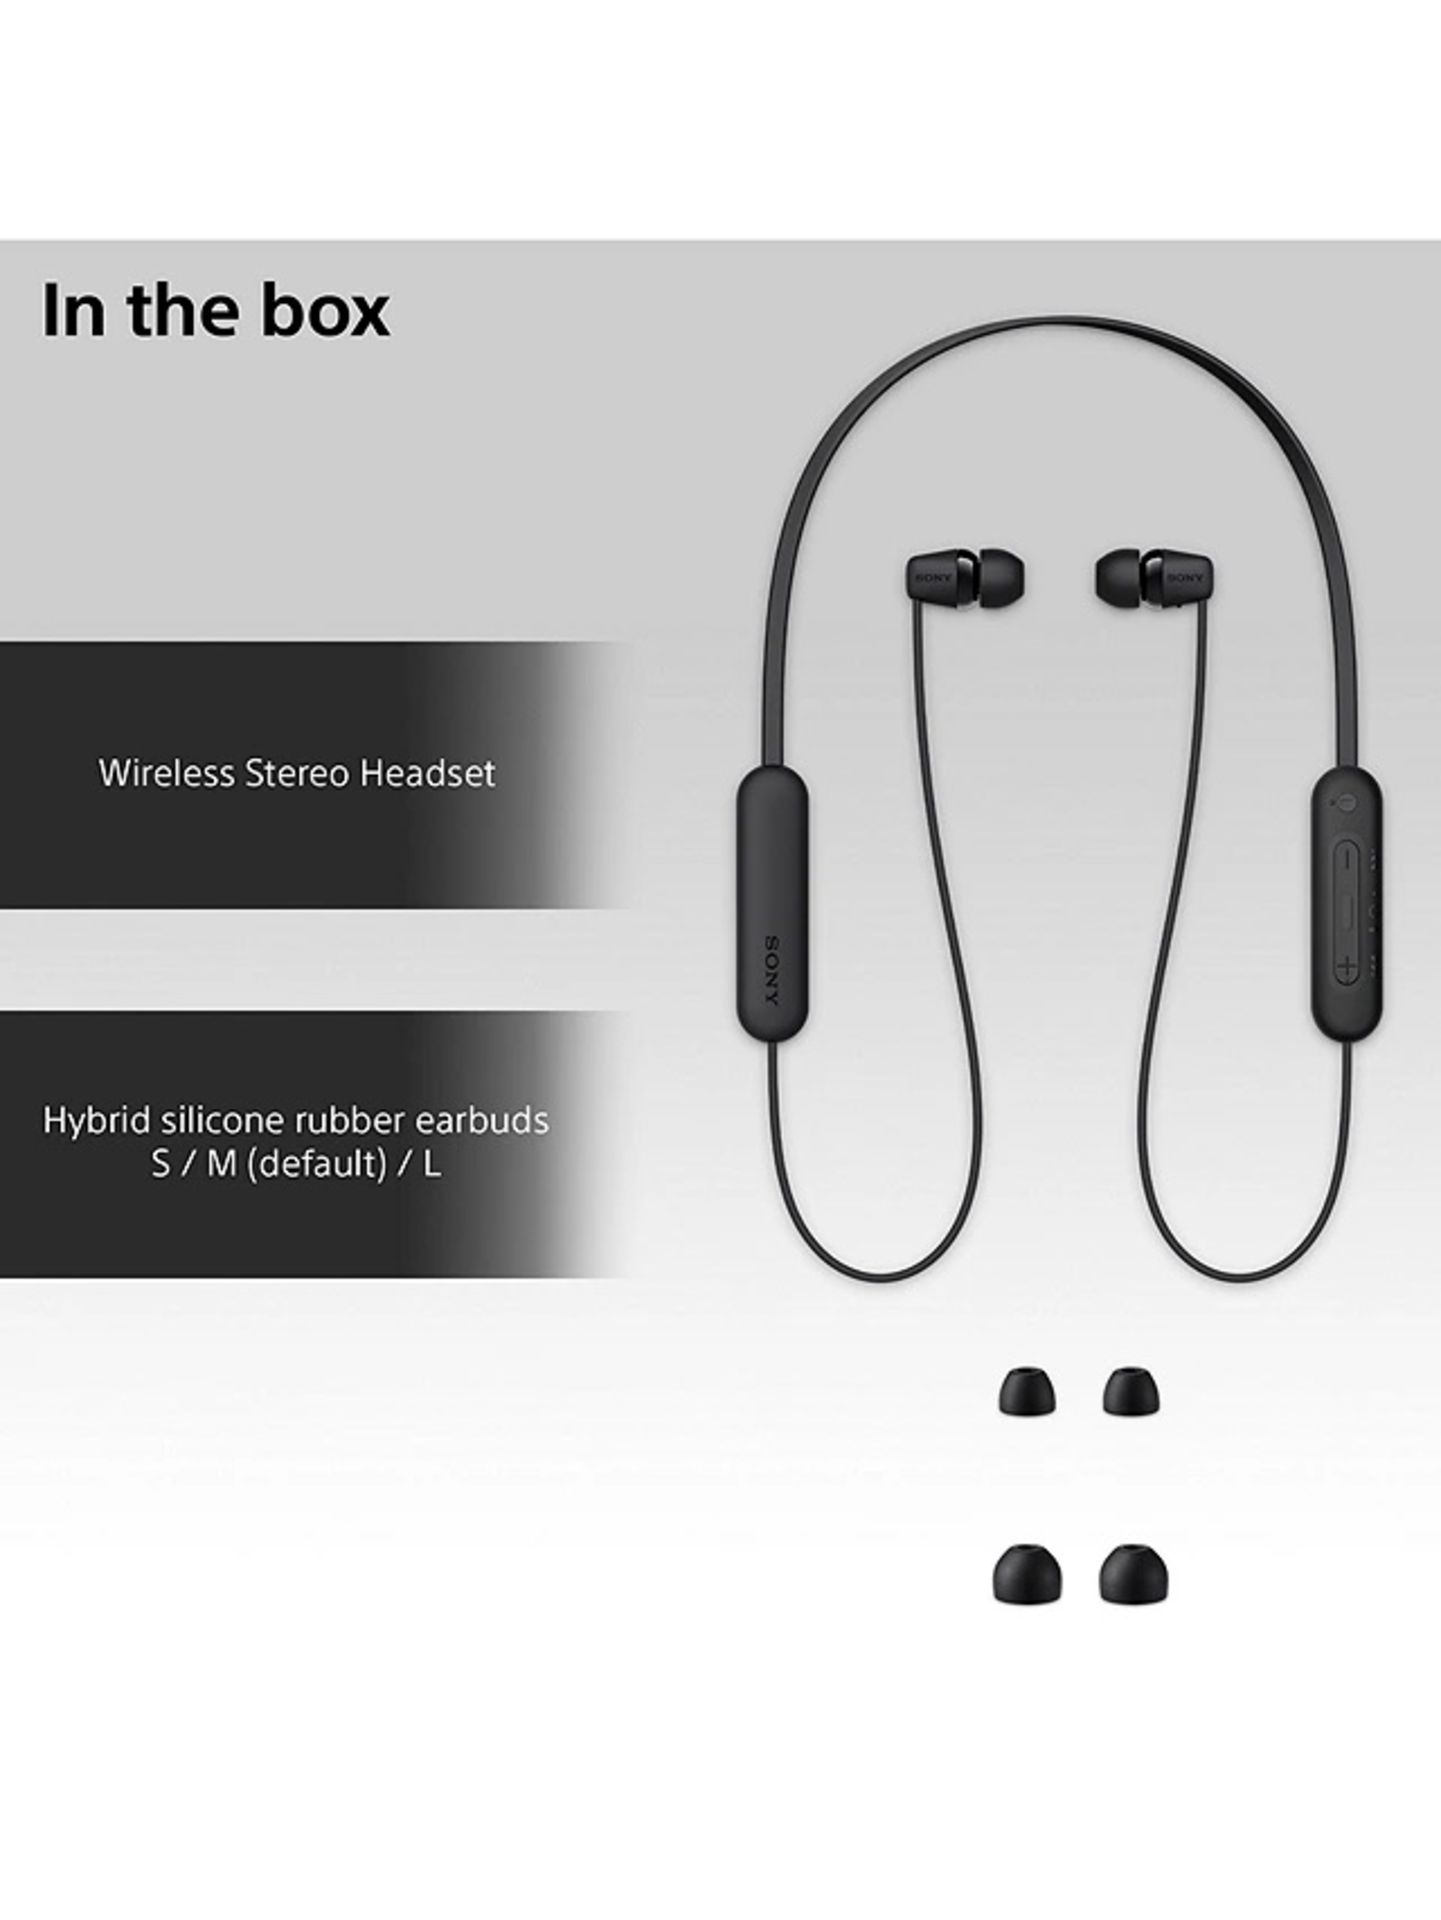 SONY WI-C100 BLUETOOTH WIRELESS IN-EAR HEADPHONES WITH MIC/REMOTE IN BLACK - RRP £35 - Image 6 of 6